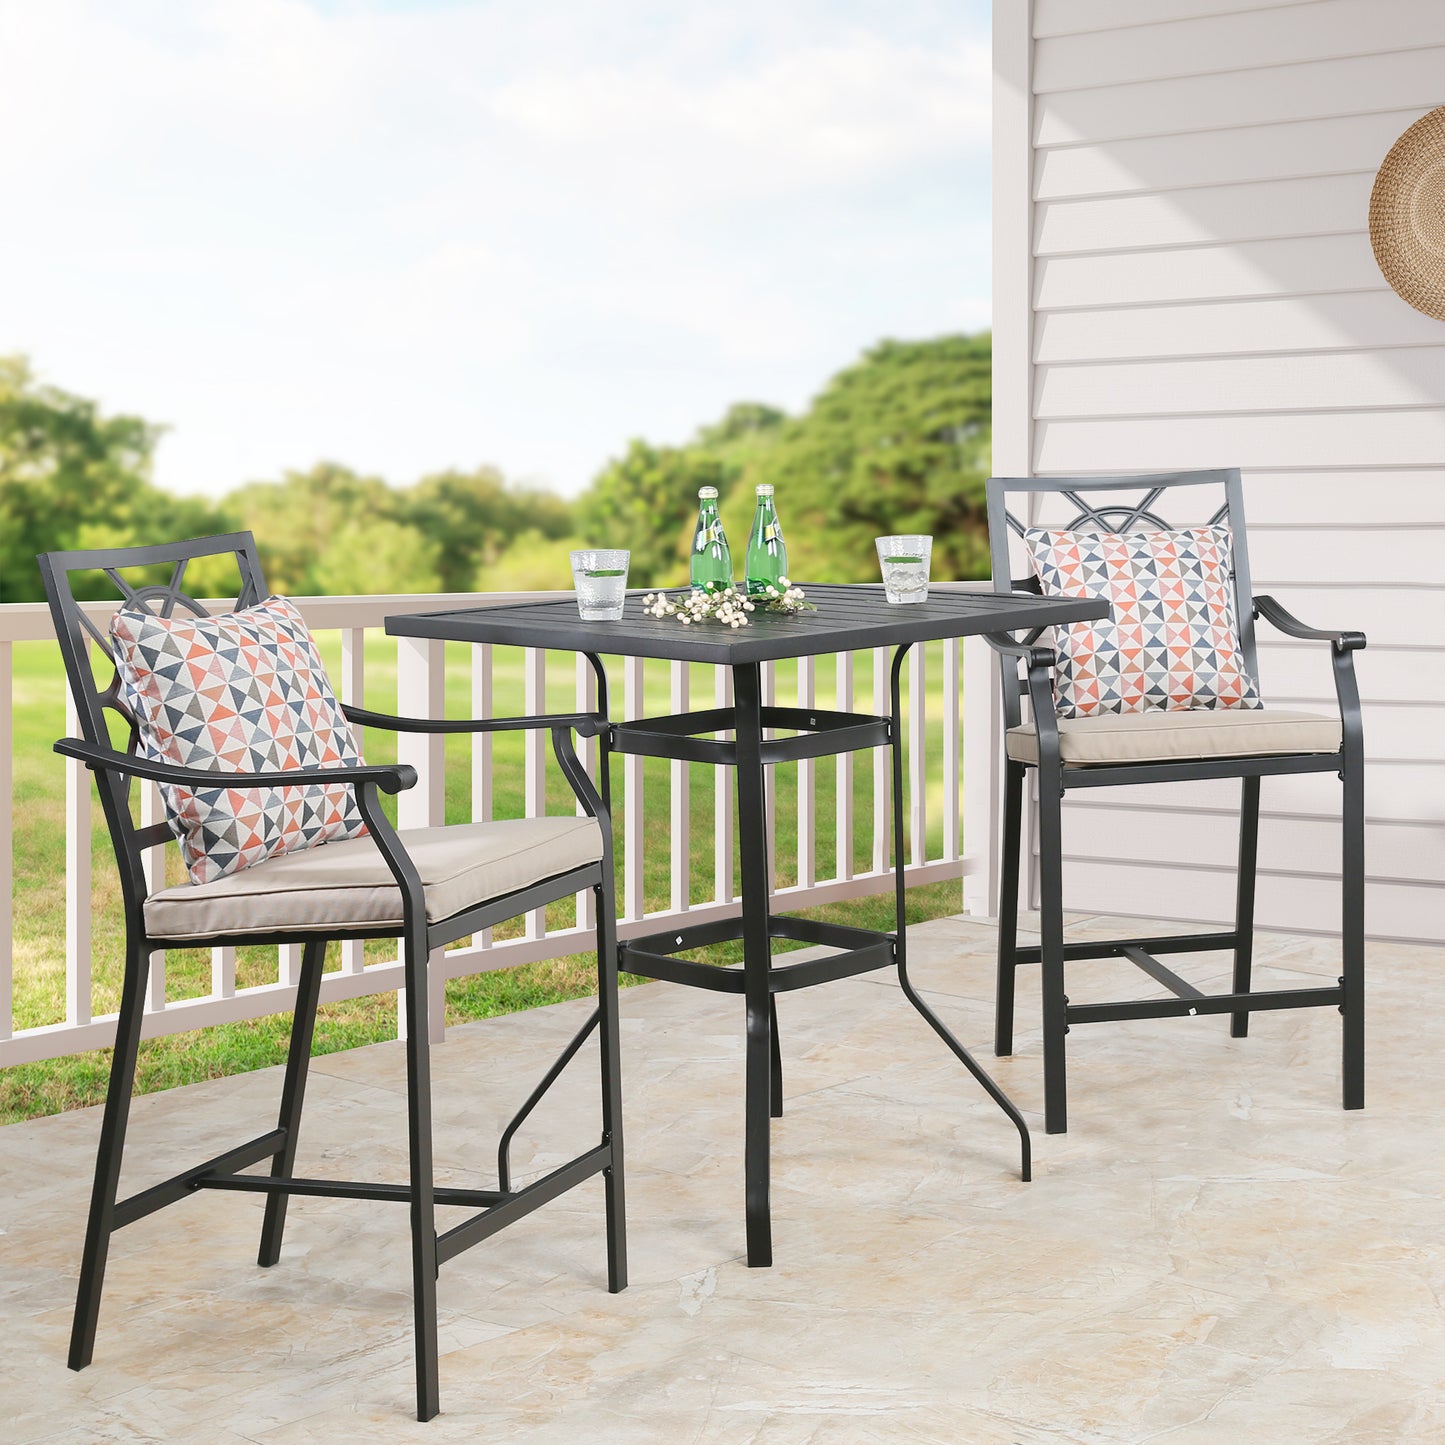 Outdoor 3 Pieces Patio Bar Height Dining Set with Square Steel Bar Table and Bar Stools with Beige Seat Cushions